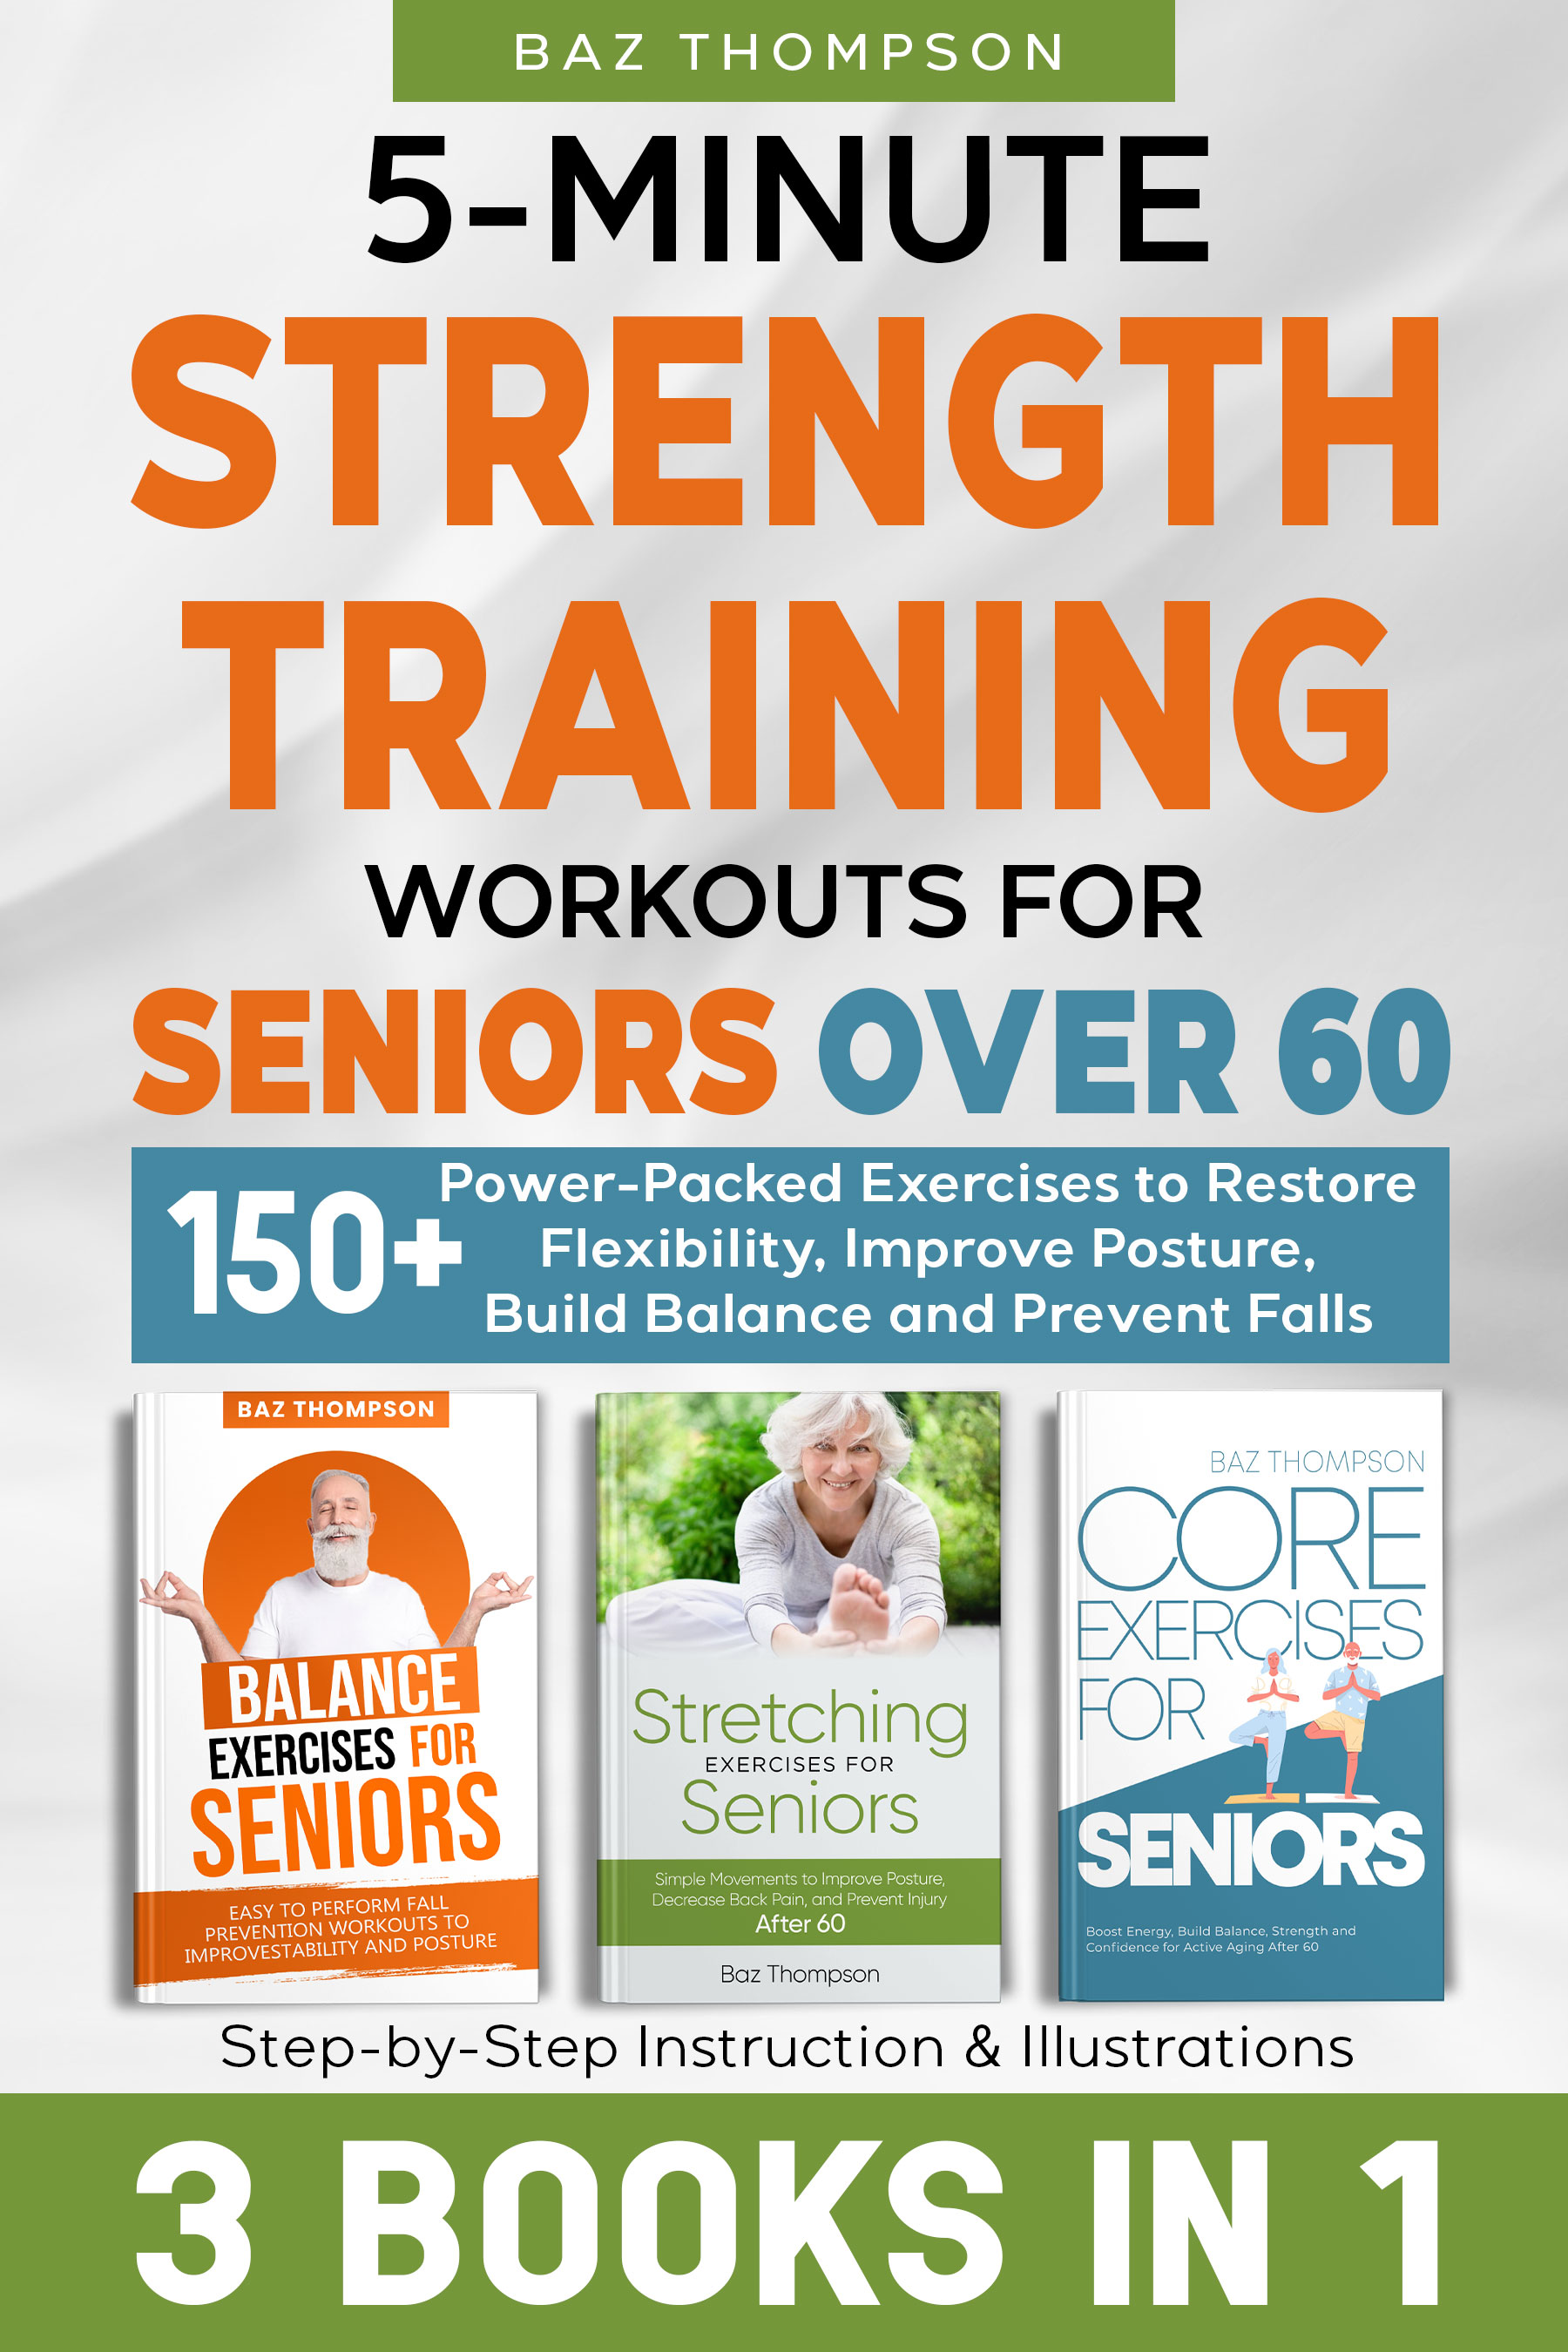 Viewing 5-Minute Strength Training Workouts for Seniors Over 60: 3 Books In  1: 150+ Power-Packed Exercises to Restore Flexibility, Improve Posture,  Build Balance and Prevent Falls Review Copy